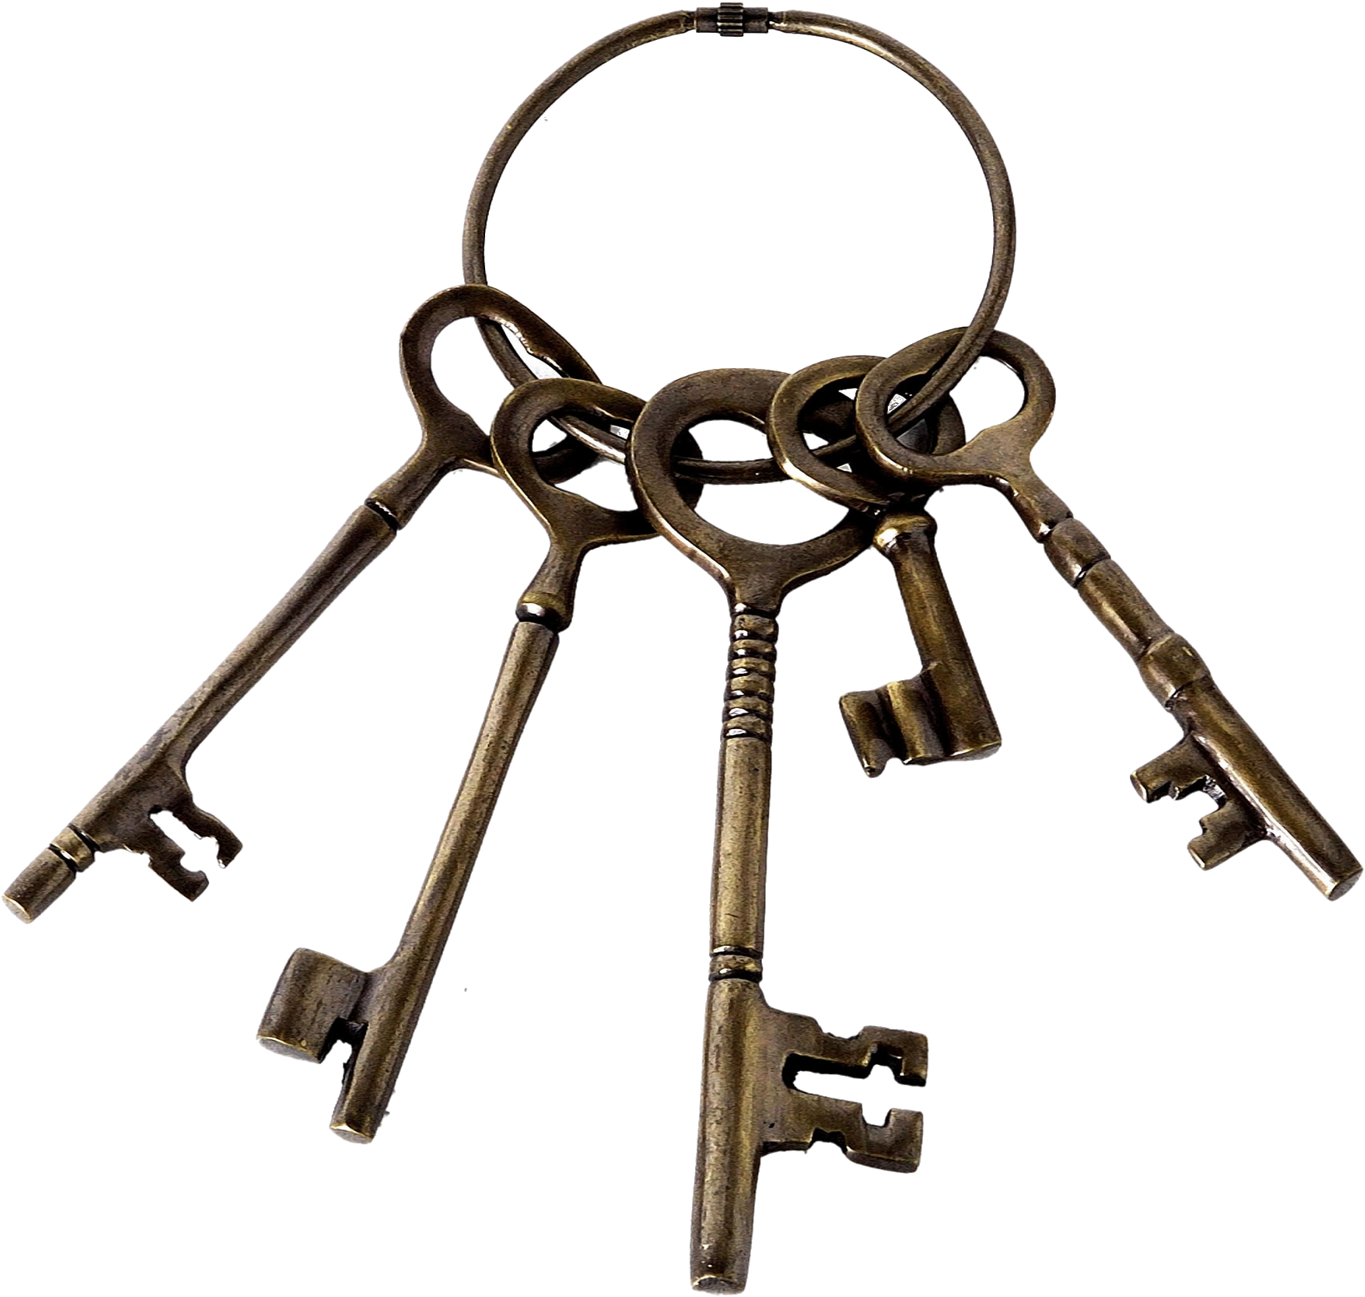 What Is Communicology - Key Ring With Keys (1400x1400)